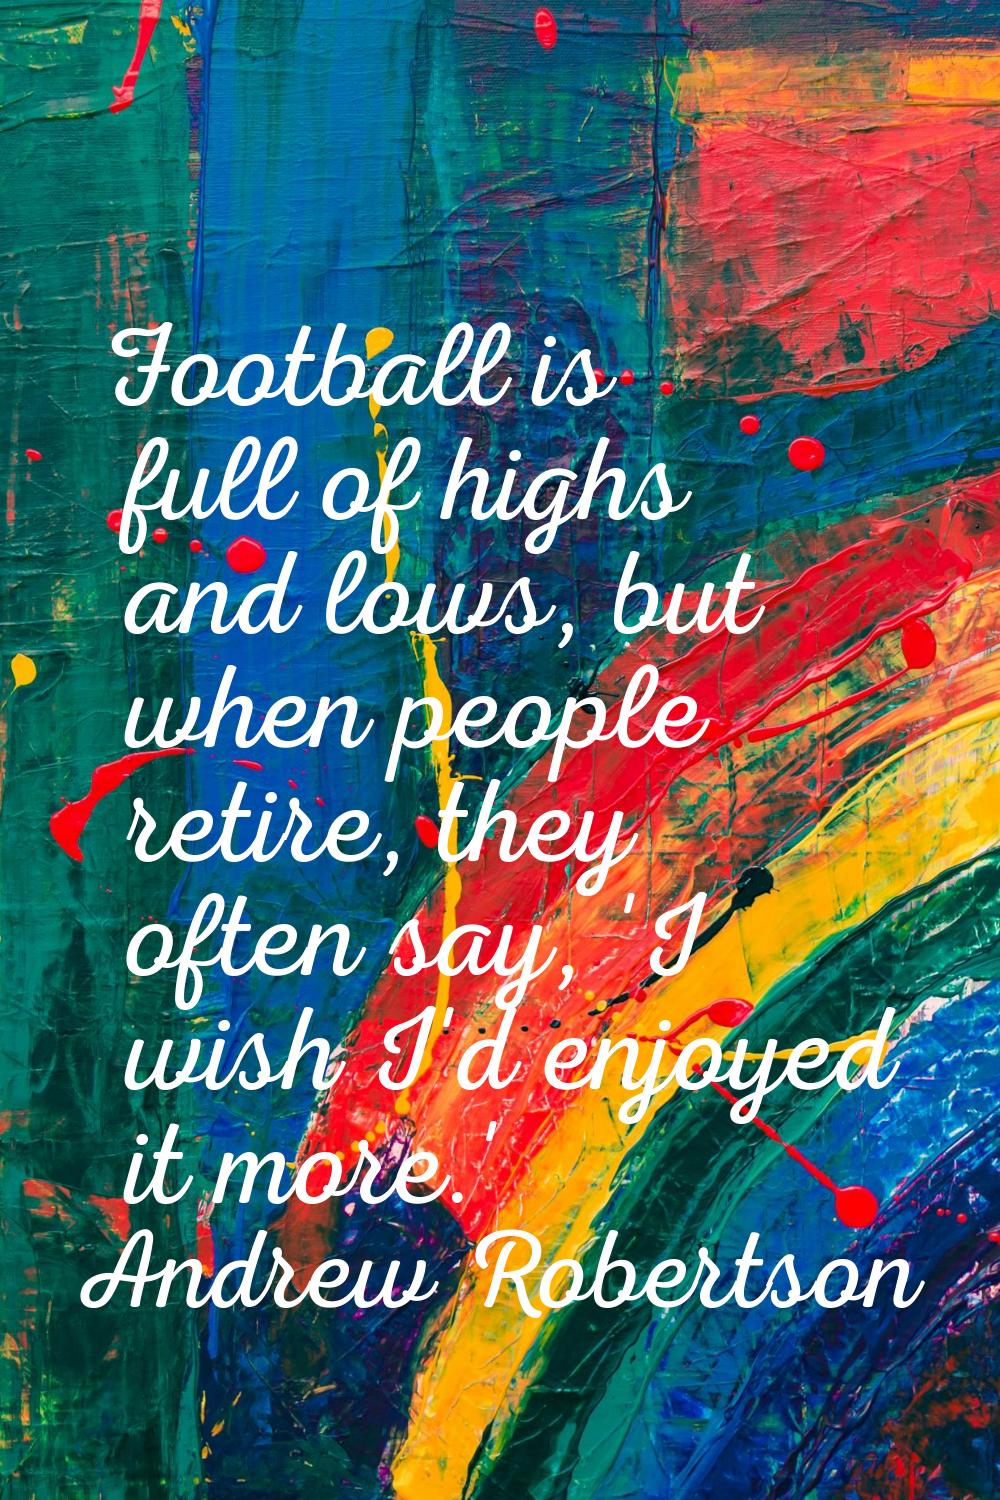 Football is full of highs and lows, but when people retire, they often say, 'I wish I'd enjoyed it 